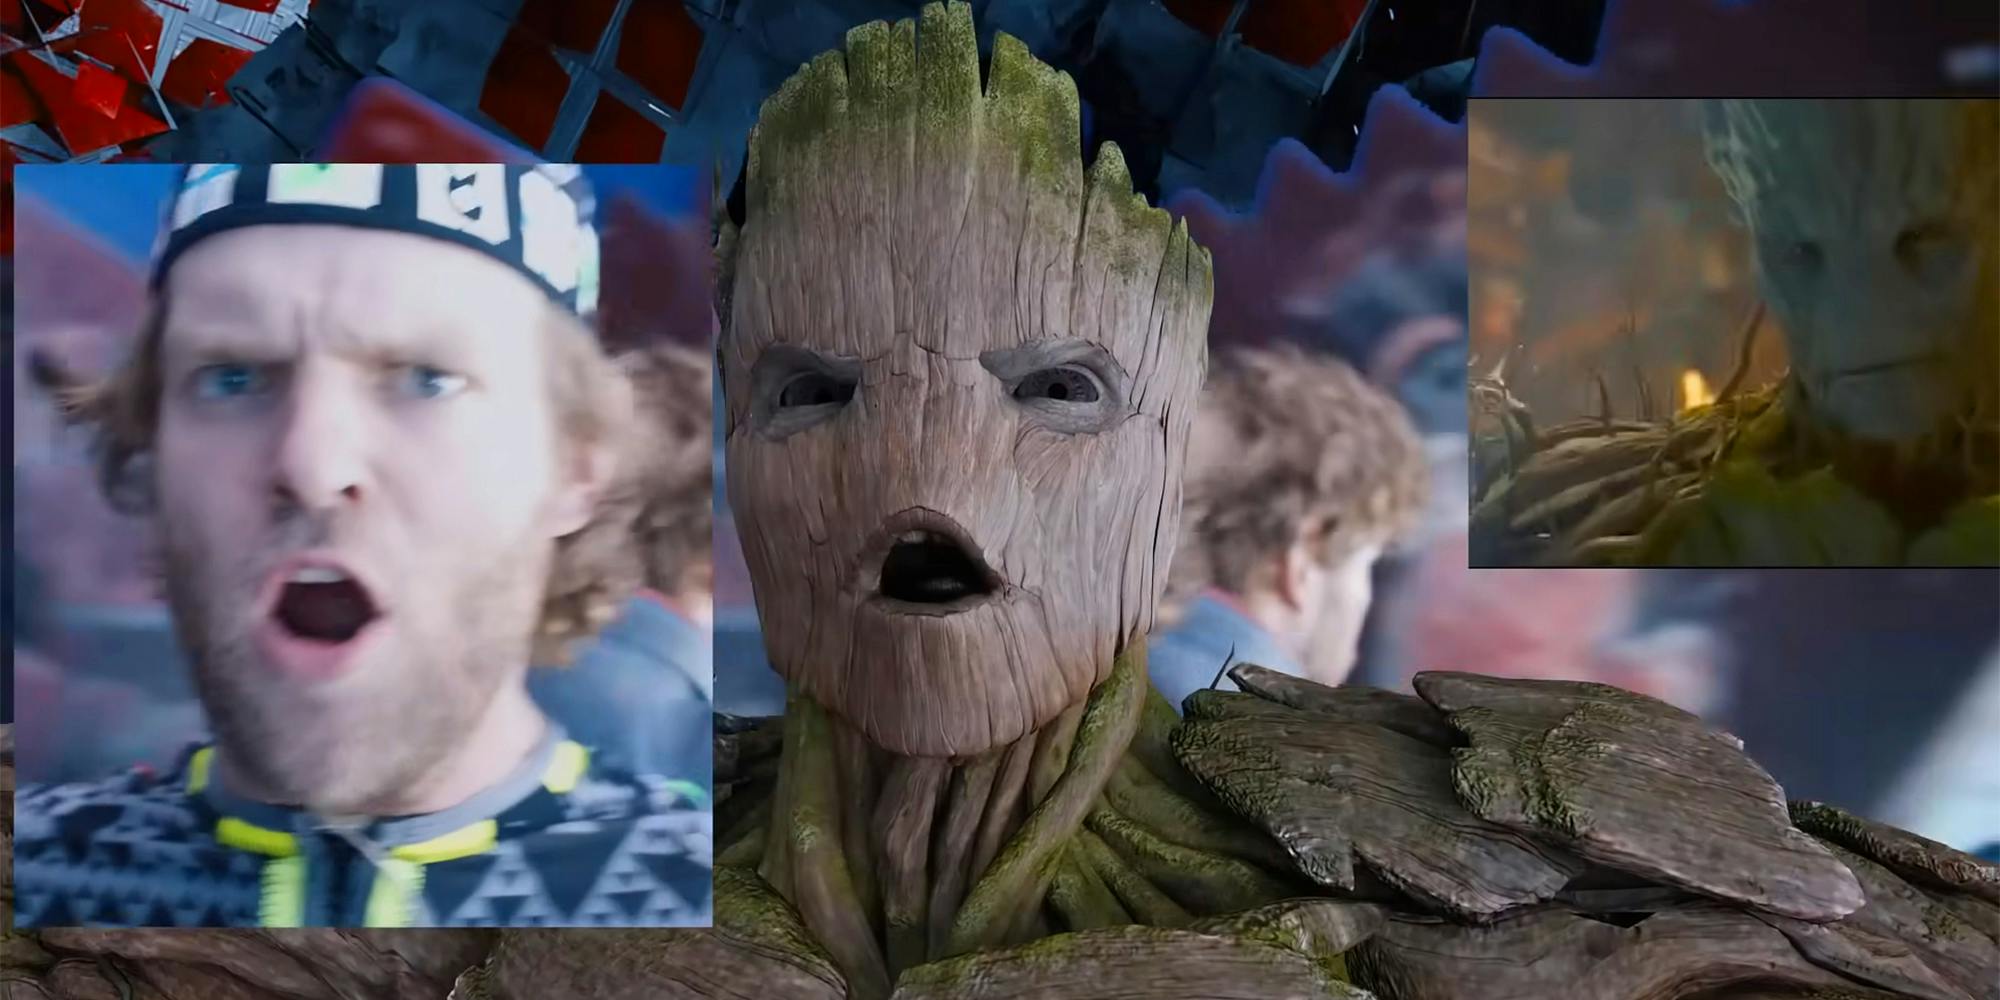 actor wearing vfx suit (inset) Groot from Guardians of the Galaxy, vfx union